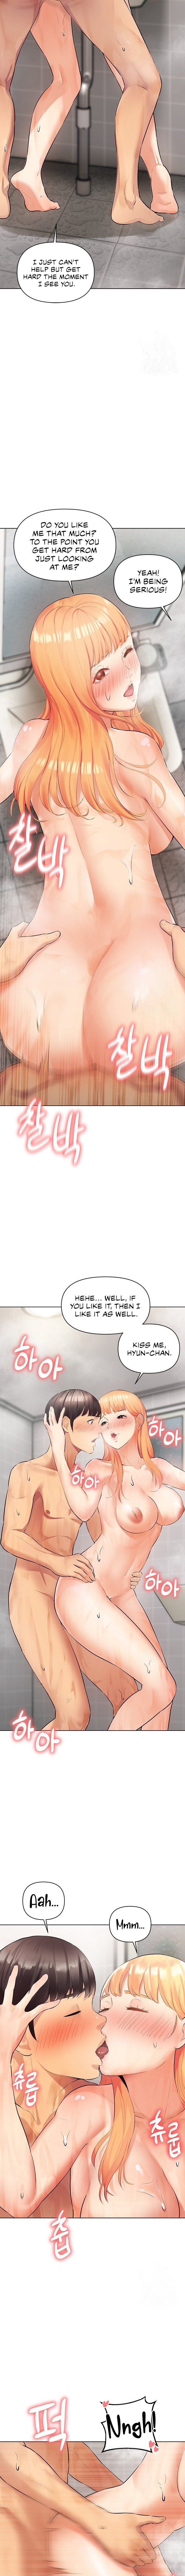 the-girls-i-couldnt-date-before-chap-9-4